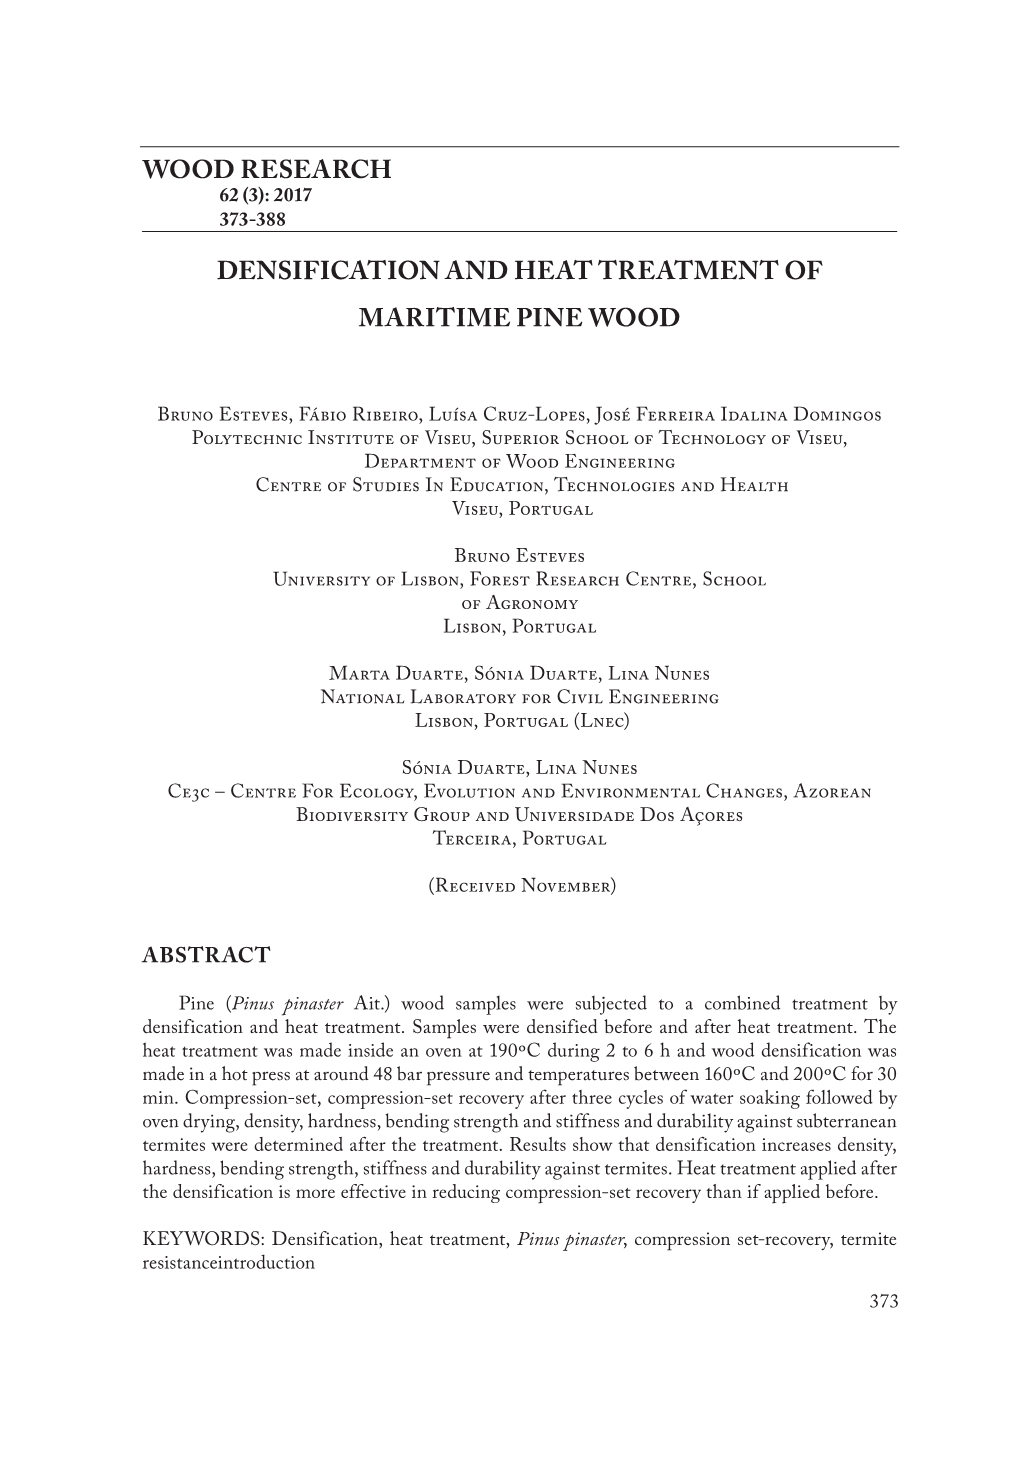 Densification and Heat Treatment of Maritime Pine Wood